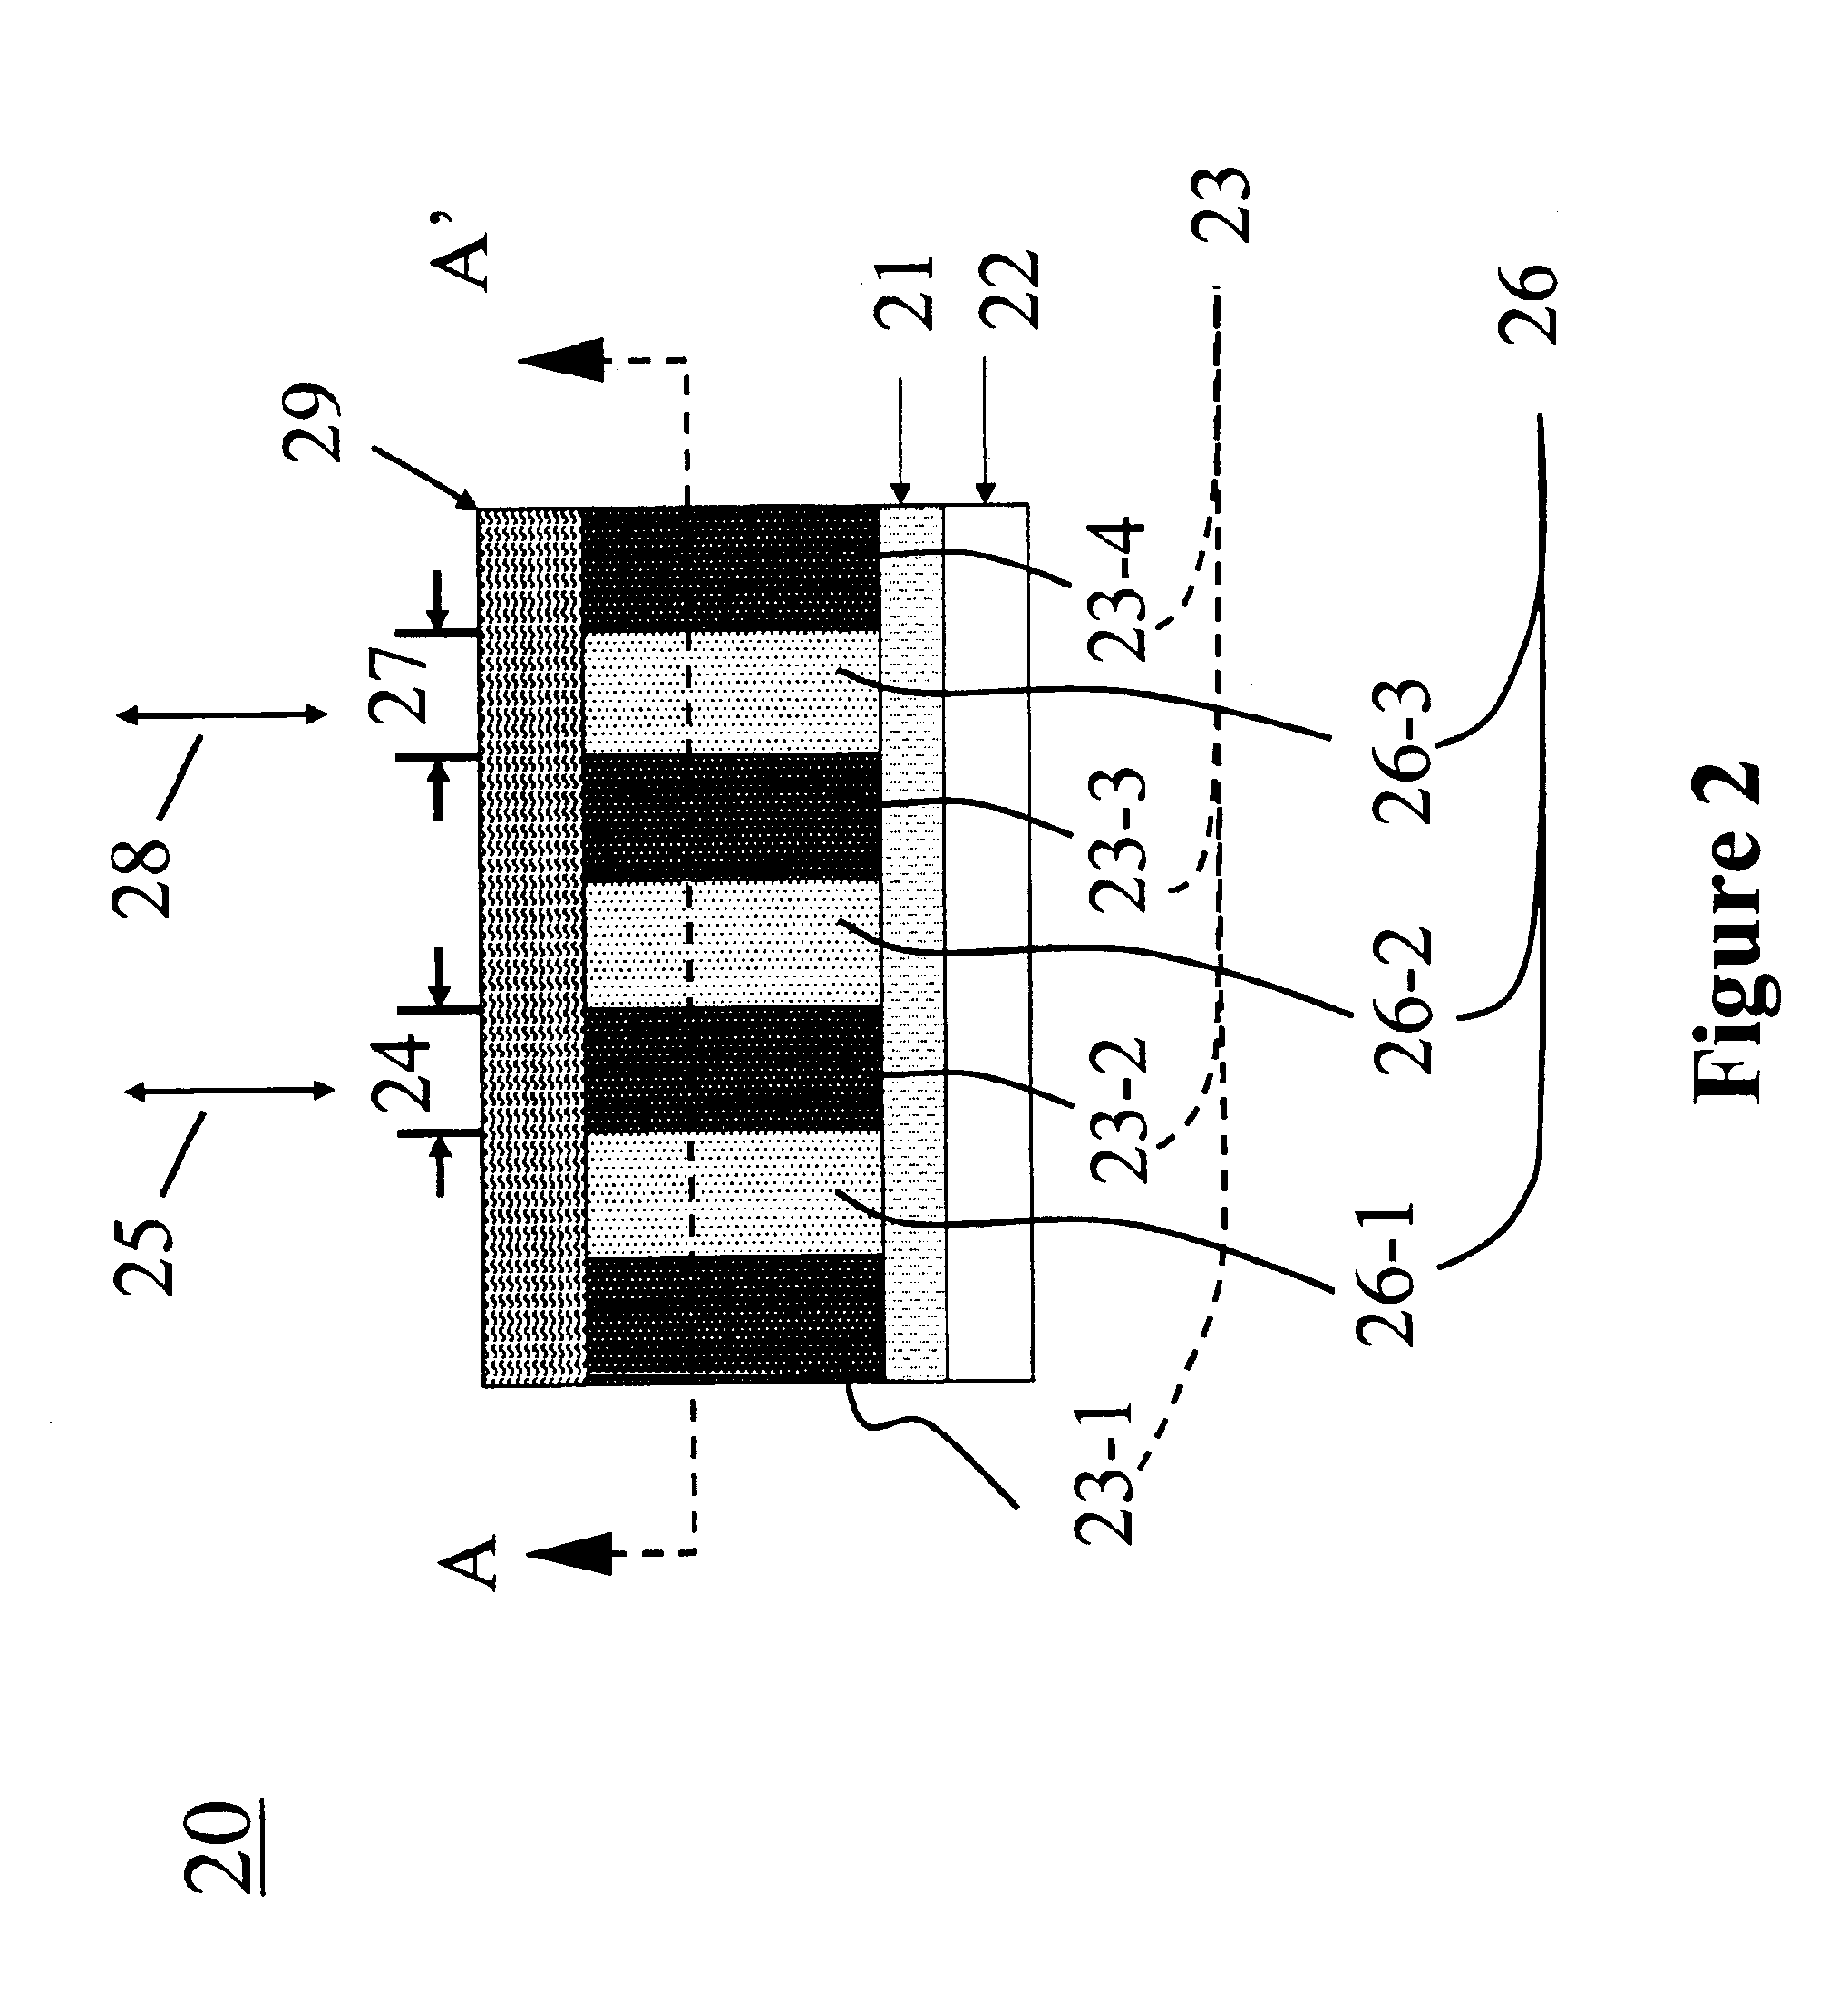 Organic semiconductor devices and methods of fabrication